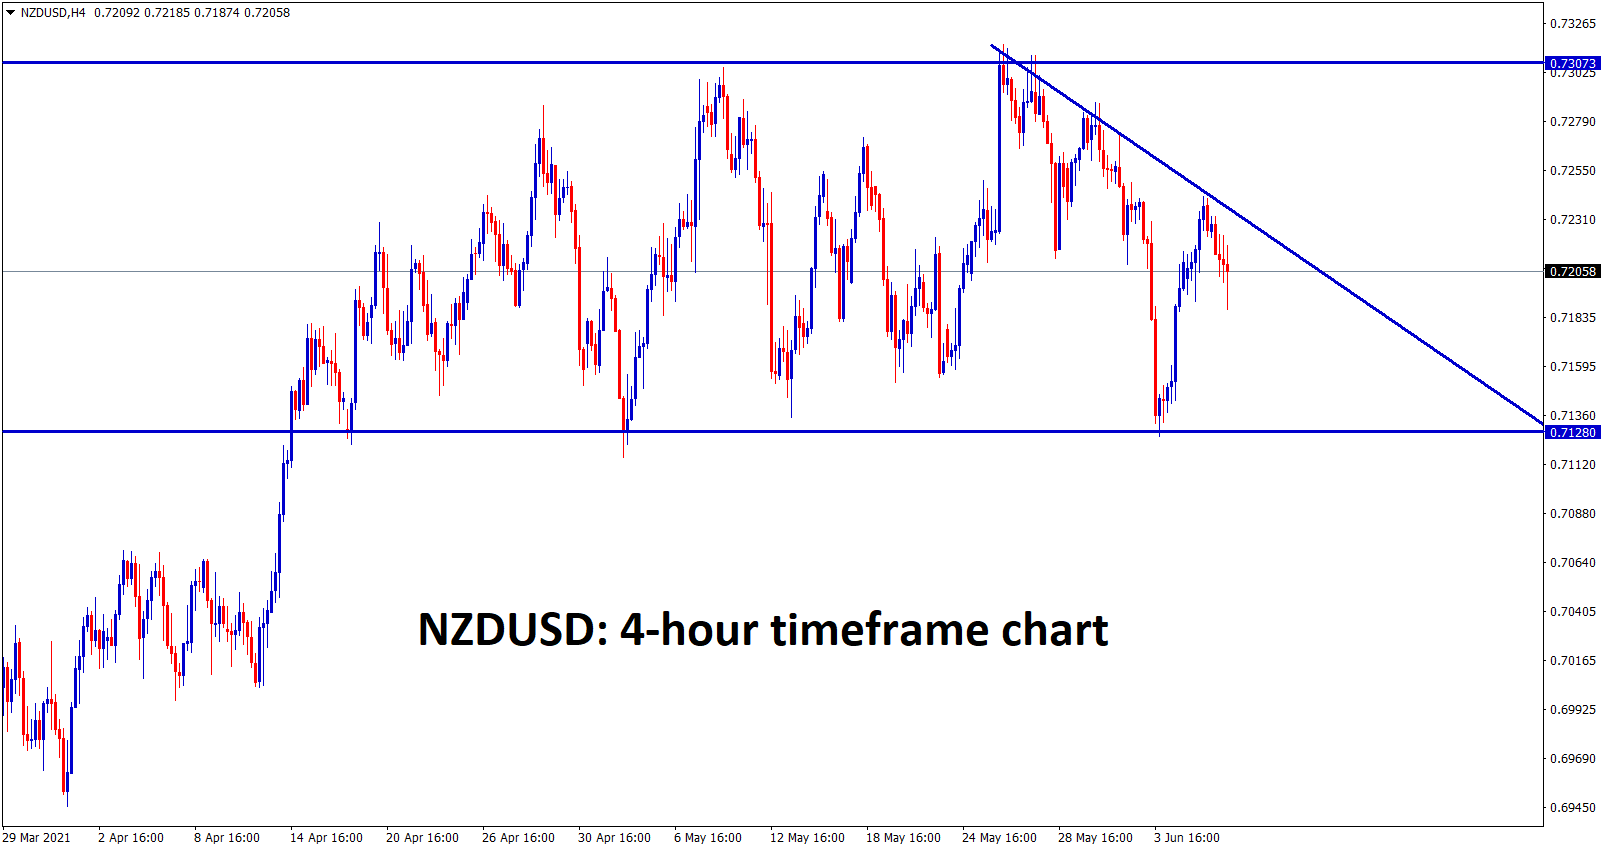 NZDUSD is consolidating and forming a lower highs wait for breakout from this consolidation pattern